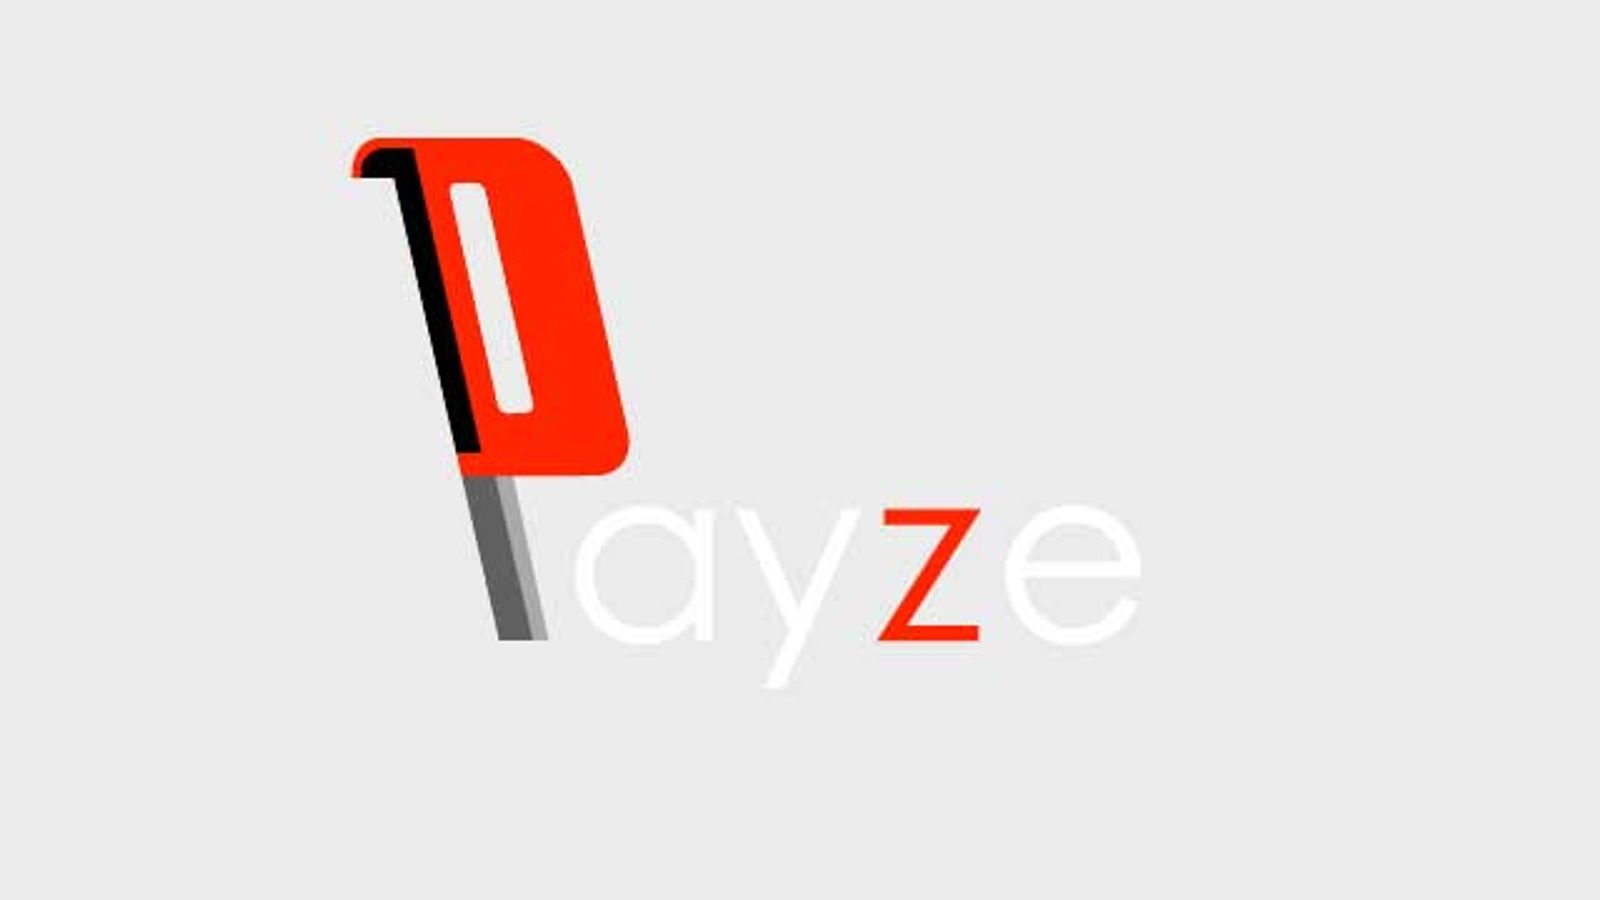 Doug Wicks Acquires Stake in Payze, Assumes CEO Position